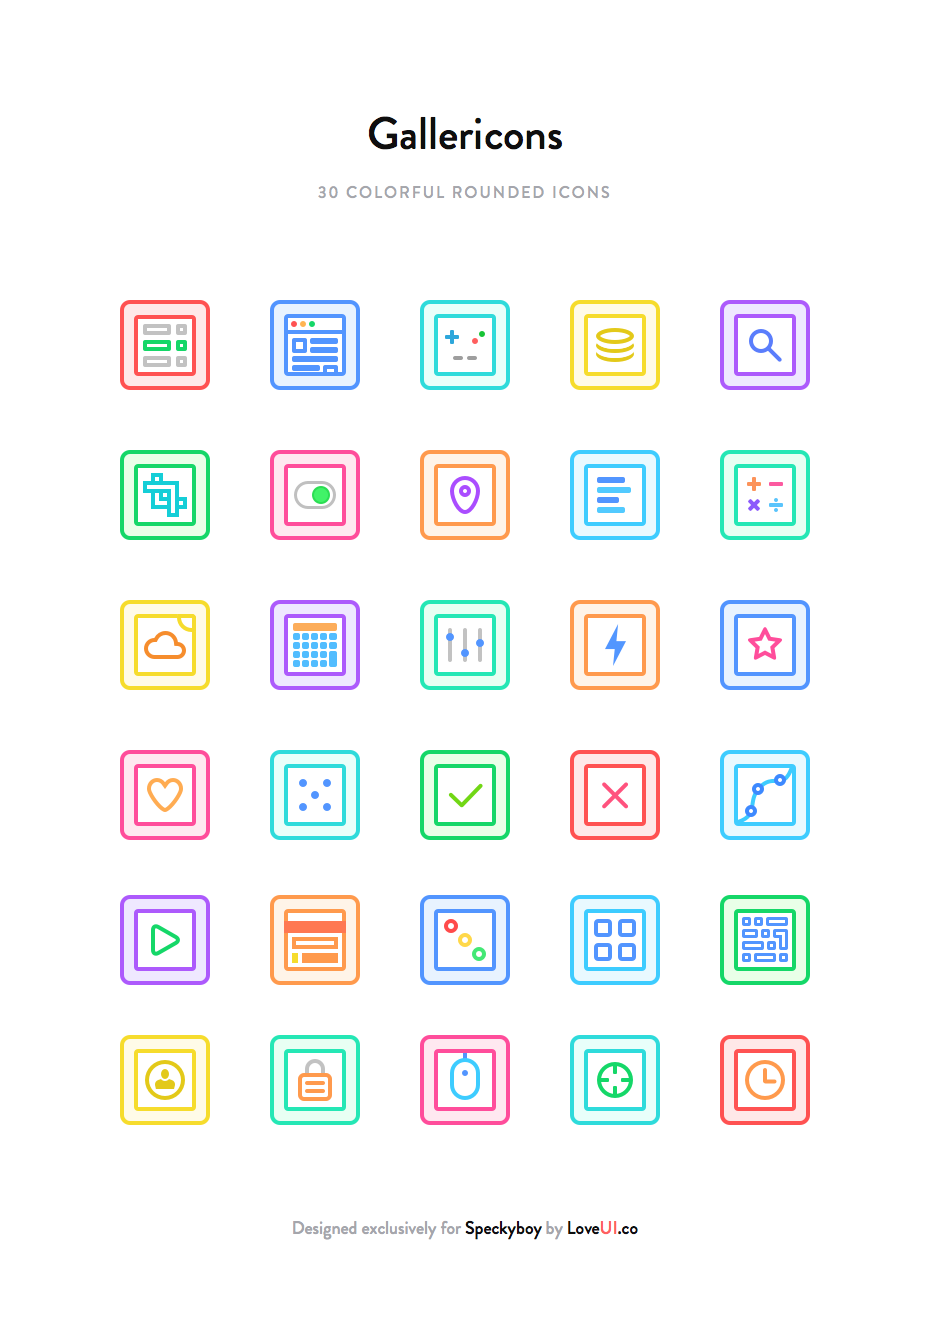 Gallericons Icon Set 30 flat rounded colourful Sketch PNG